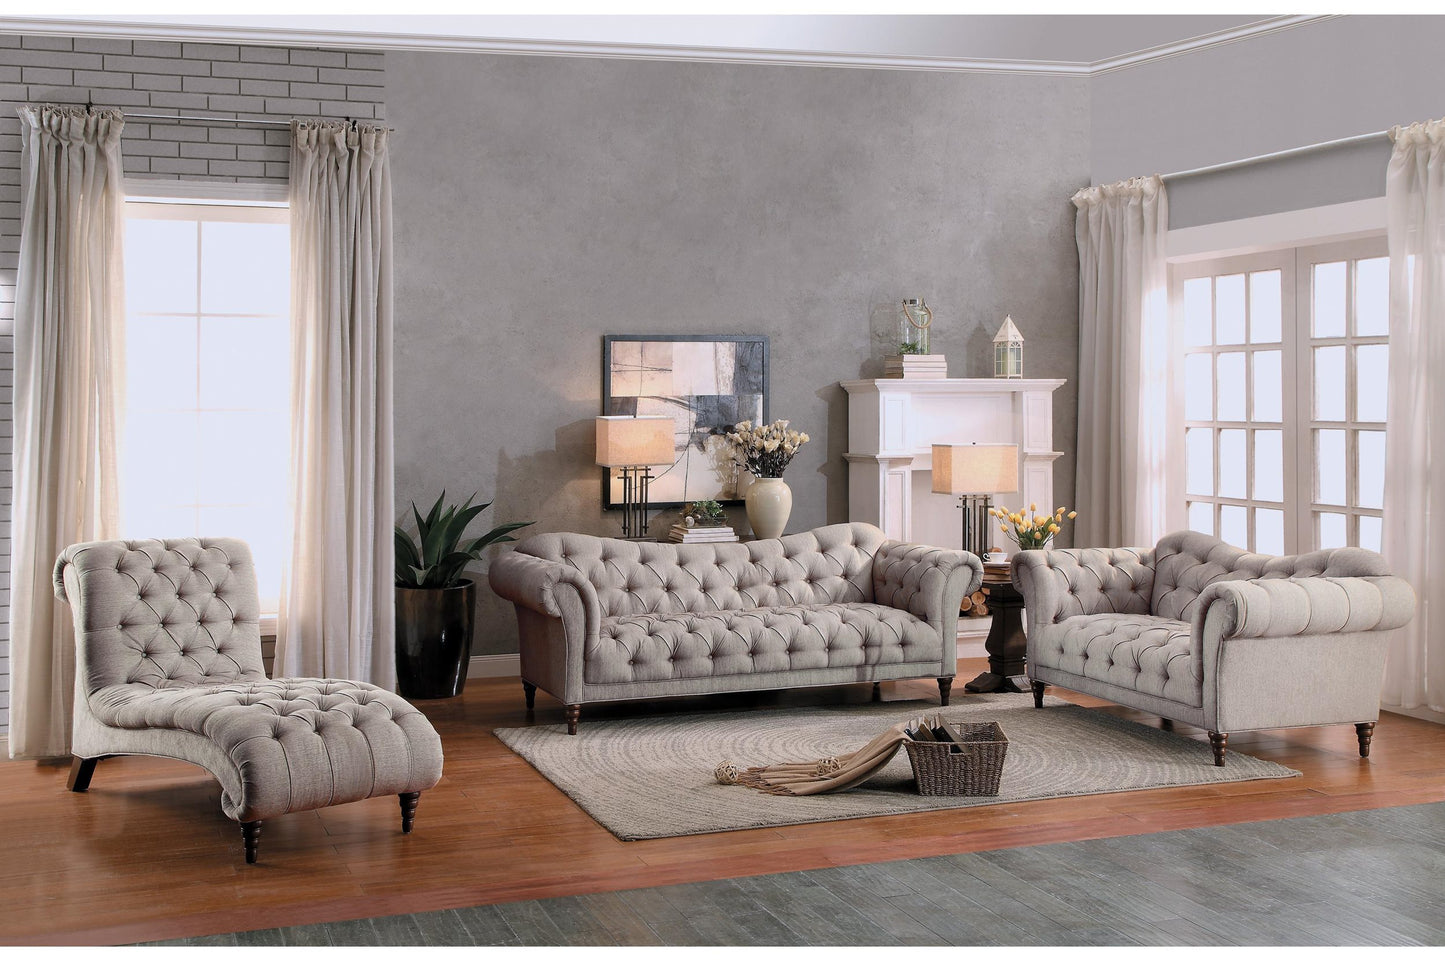 Homelegance St. Claire Park Sofa in Neutral Beige Fabric